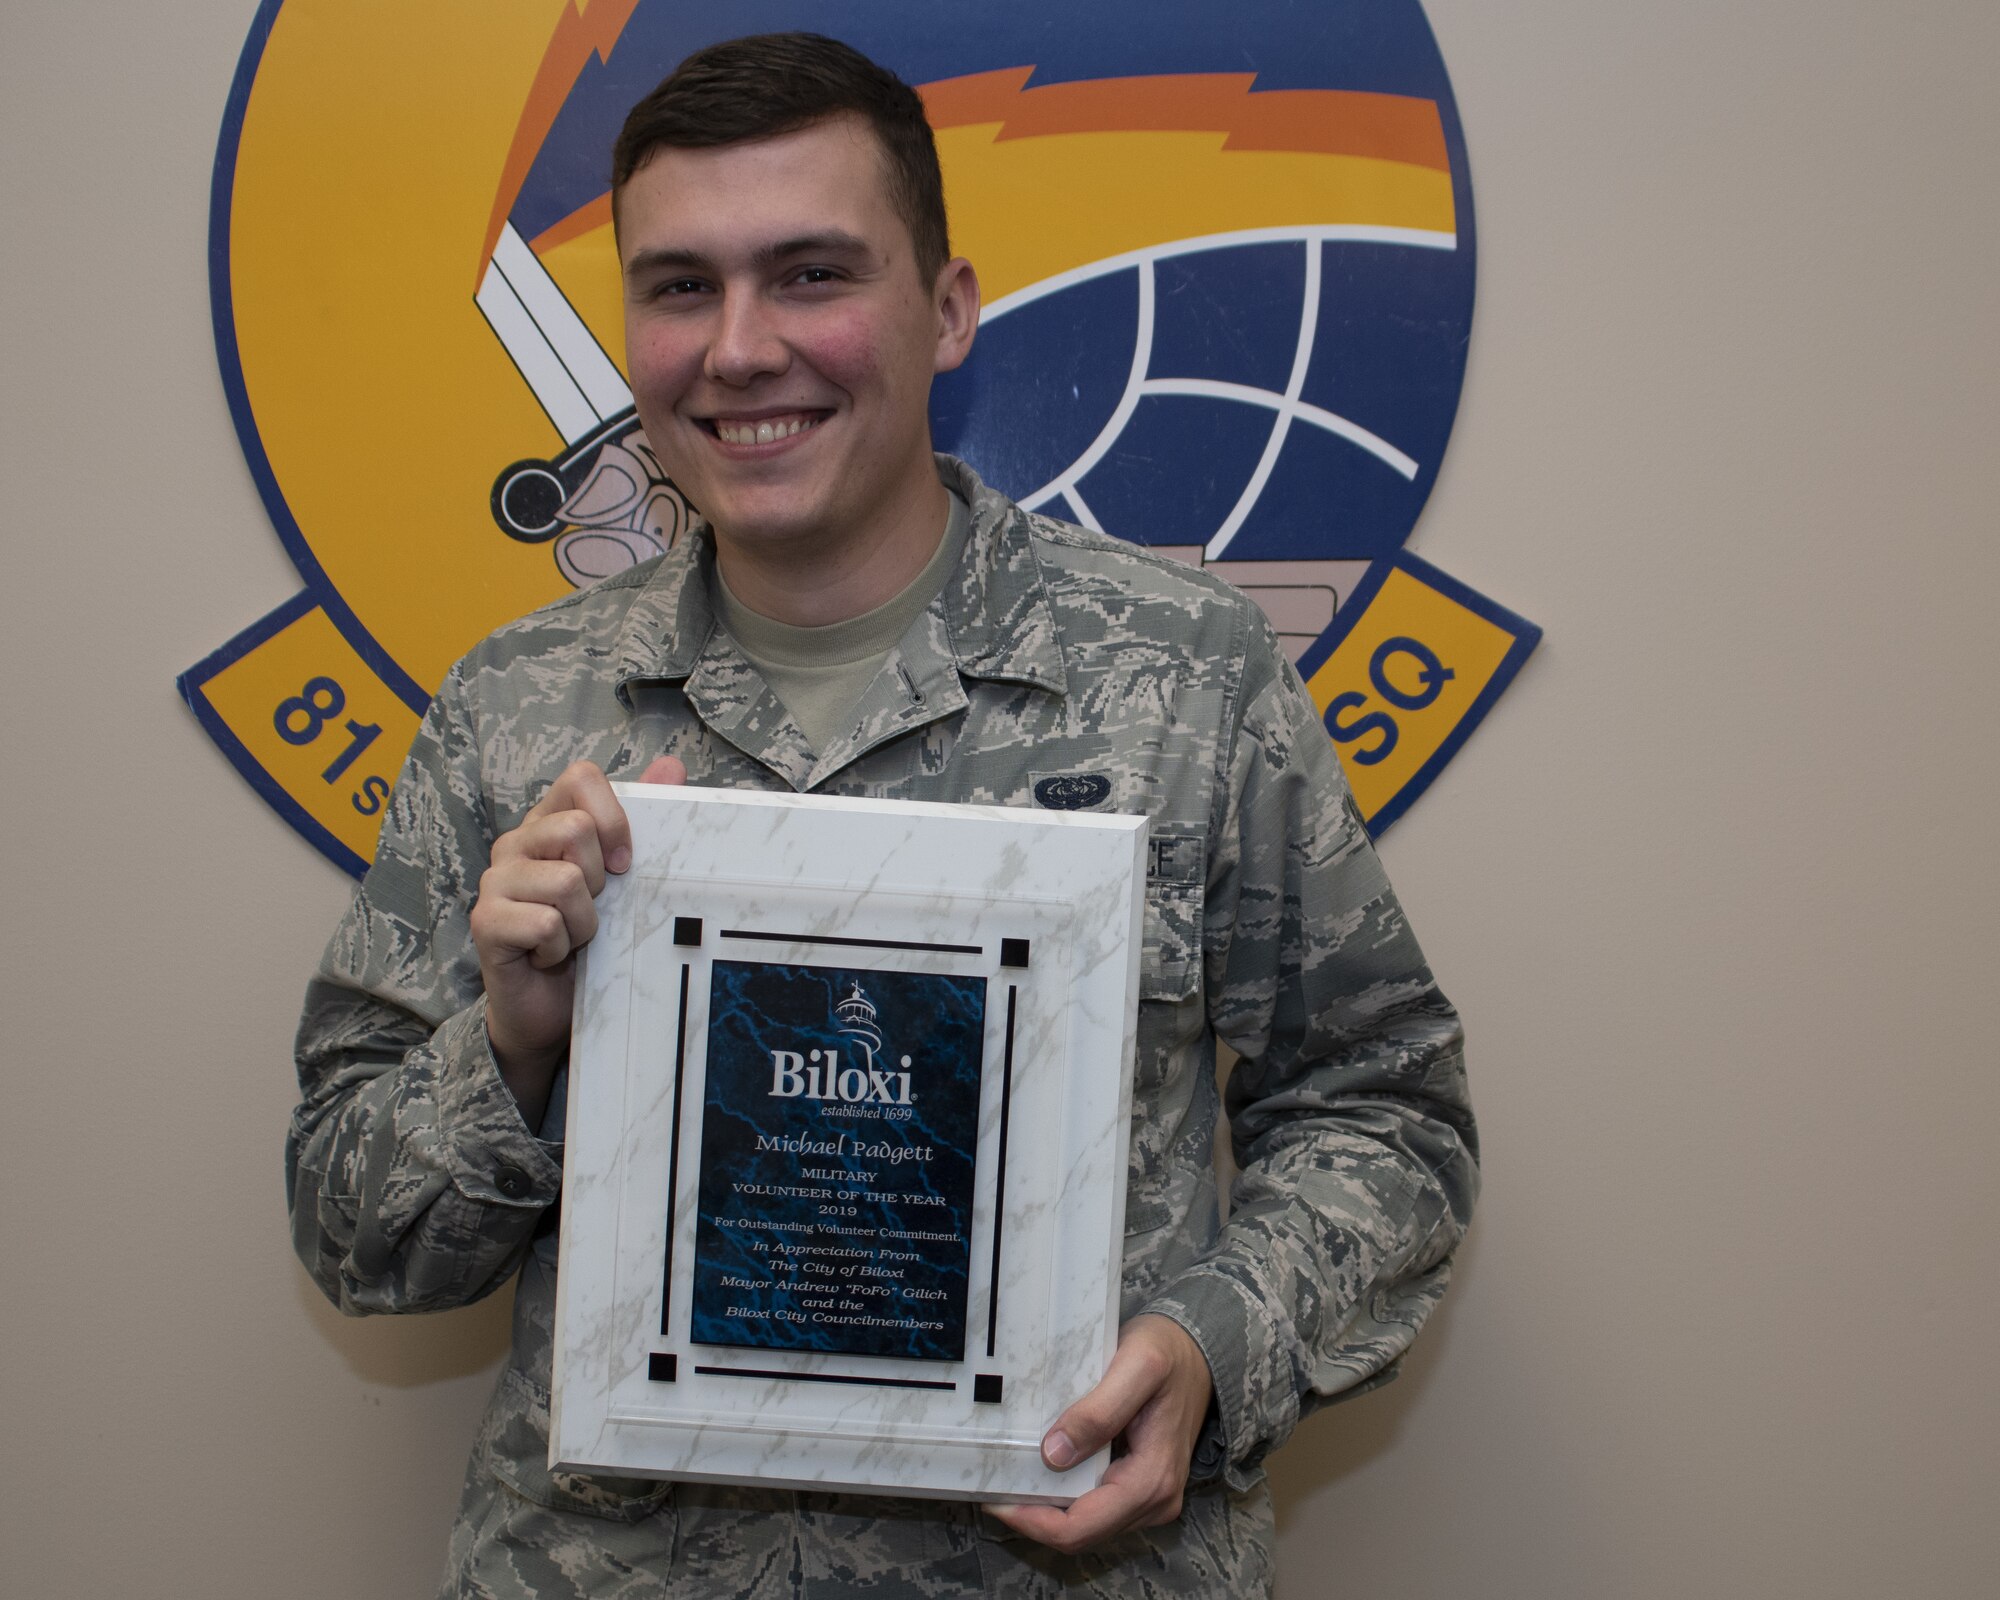 U.S. Air Force Senior Airman Michael Padgett, 81st Communications Squadron client systems technician, poses for a picture inside the Locker House on Keesler Air Force Base, Mississippi, April 25, 2019. Padgett received the 2019 Military Volunteer of the Year award for the City of Biloxi, for his selfless dedication to volunteering in the local community. (U.S. Air Force photo by Airman 1st Class Spencer Tobler)